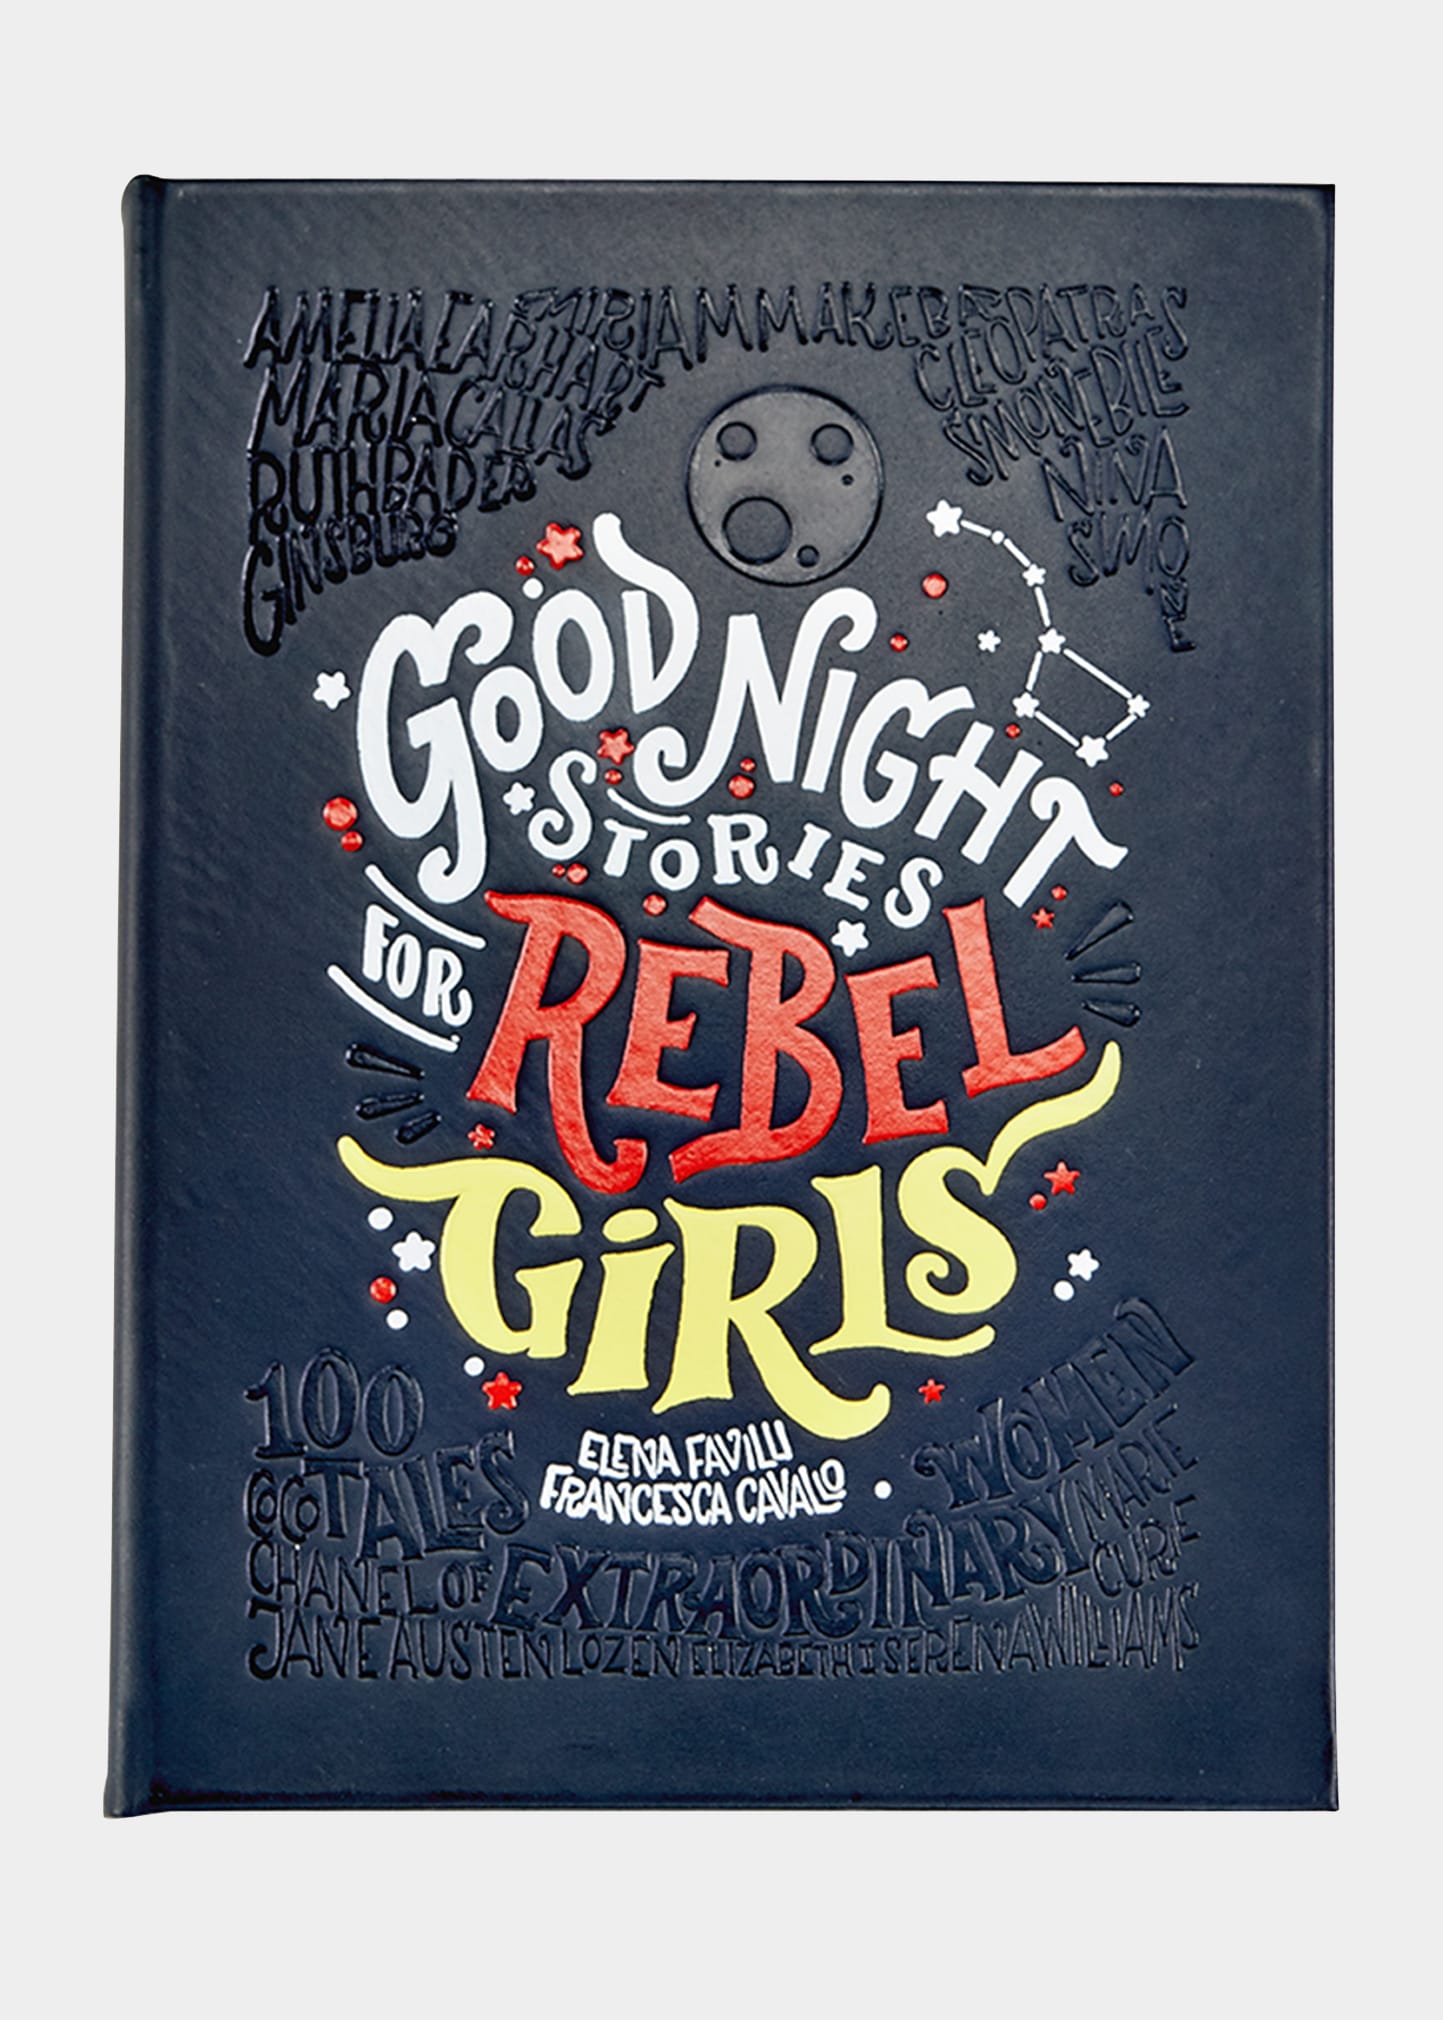 Personalized Leather Bound "Goodnight Stories For Rebel Girls" Children's Book